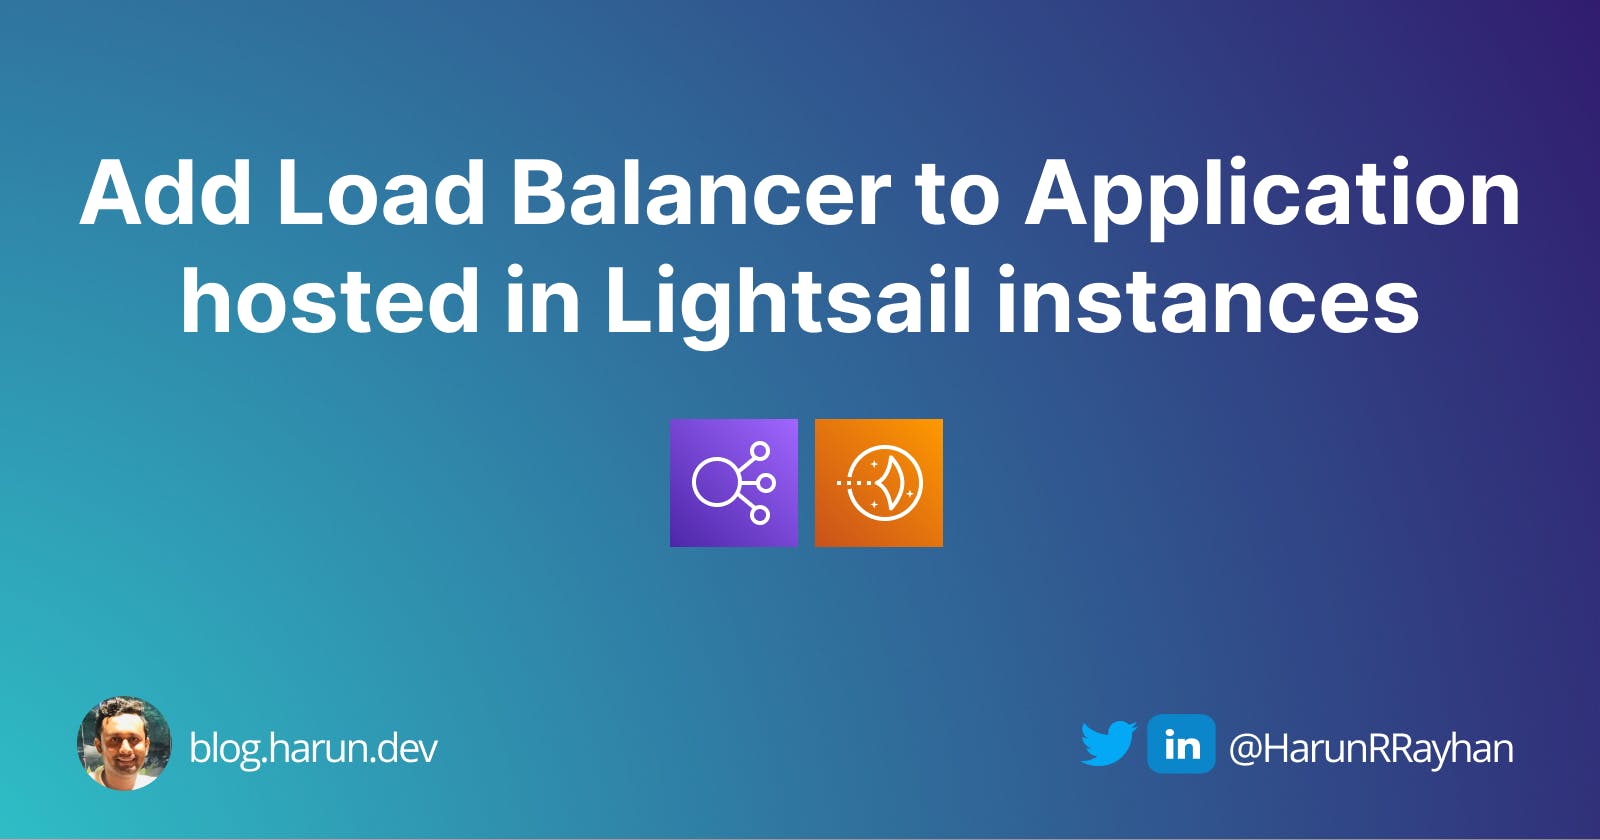 Add Lightsail Load Balancer to Application hosted in Amazon Lightsail instance(s)